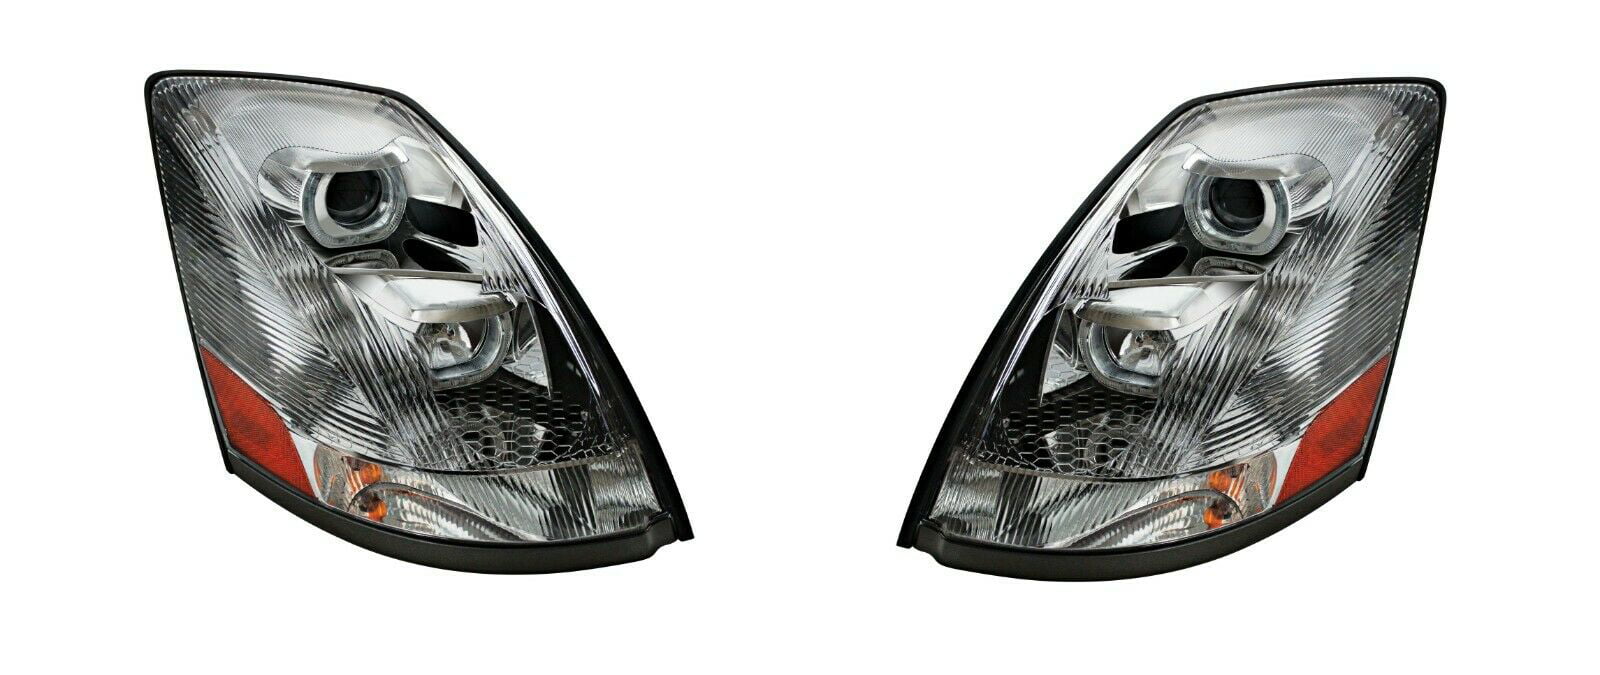 Pair Projection Headlights W/ White LED Halo DRL for 2004-17 Volvo VN/VNL 